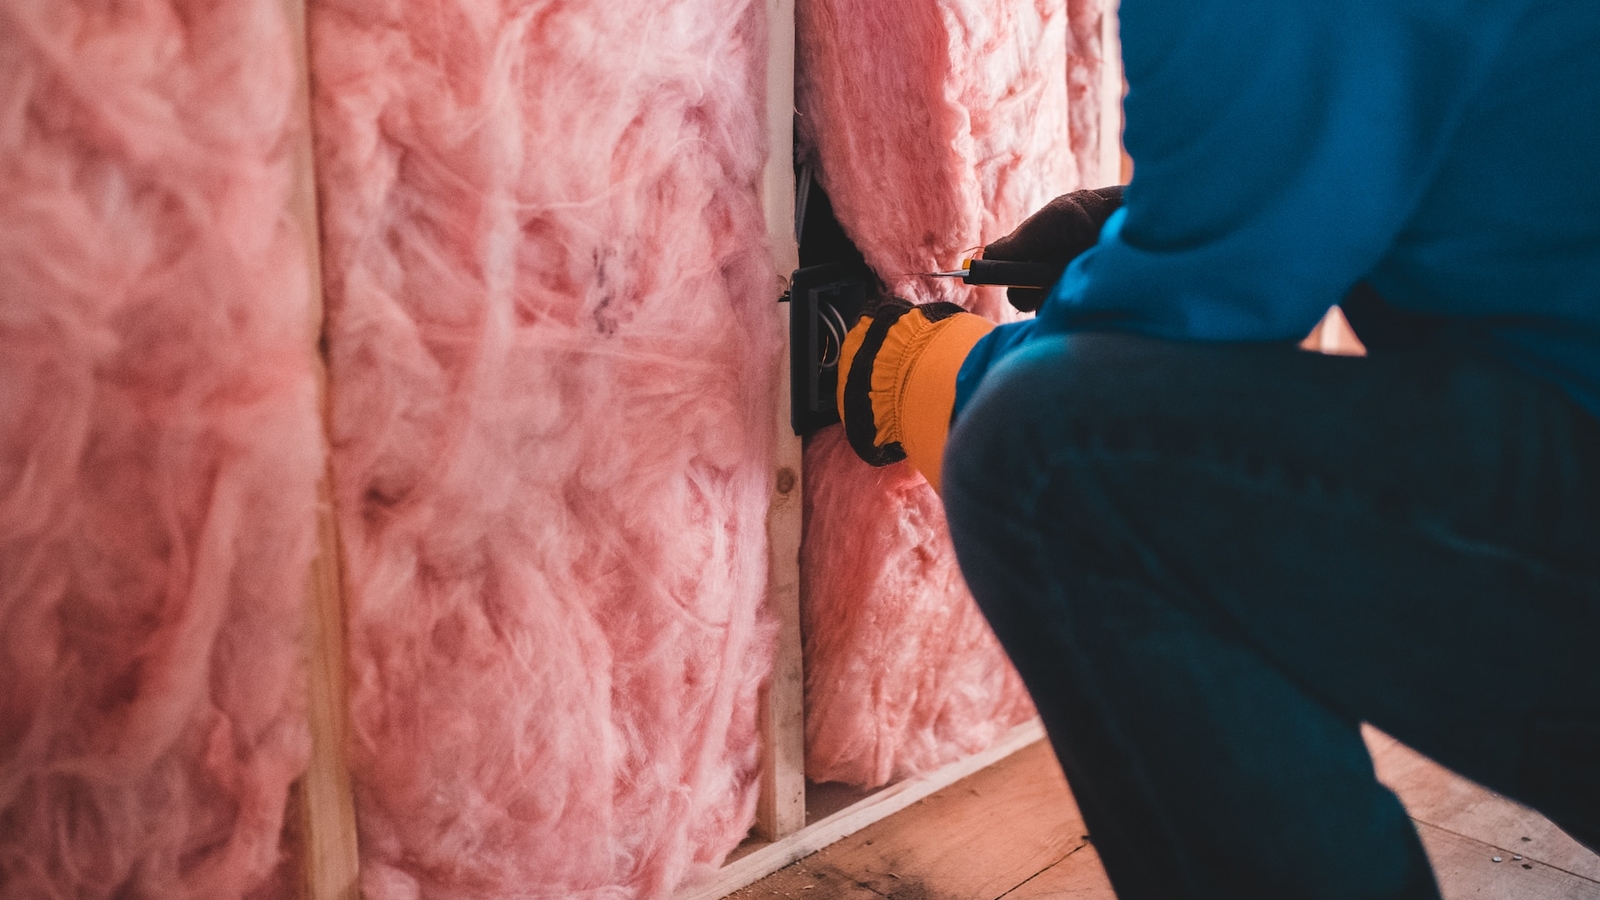 Home Insulation Being Applied To A Wall